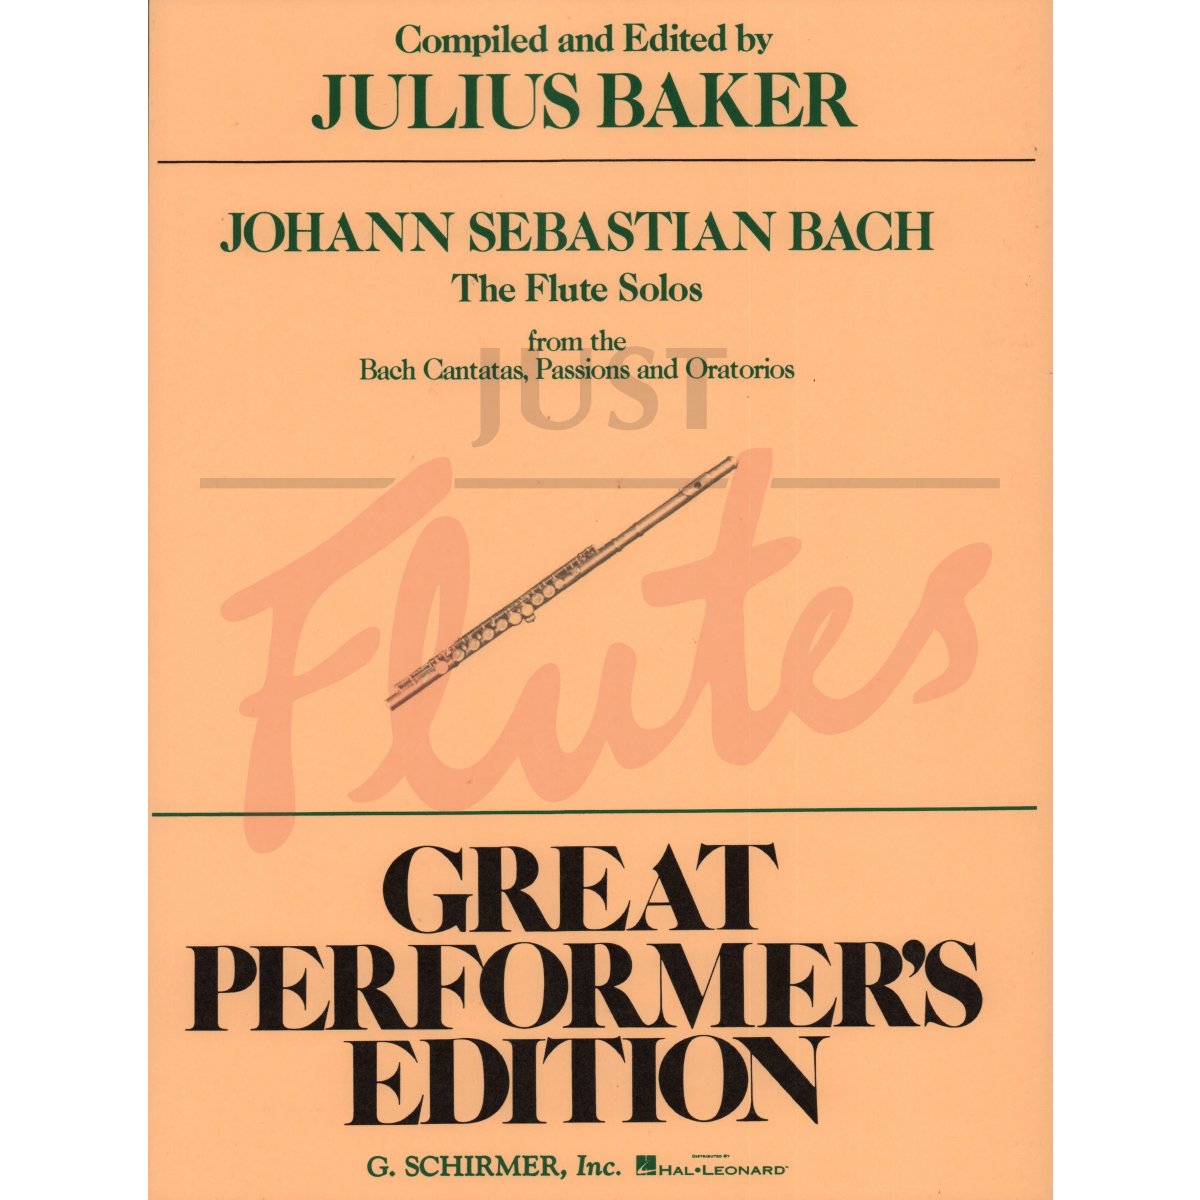 The Flute Solos from the Bach Cantatas, Passions and Oratorios